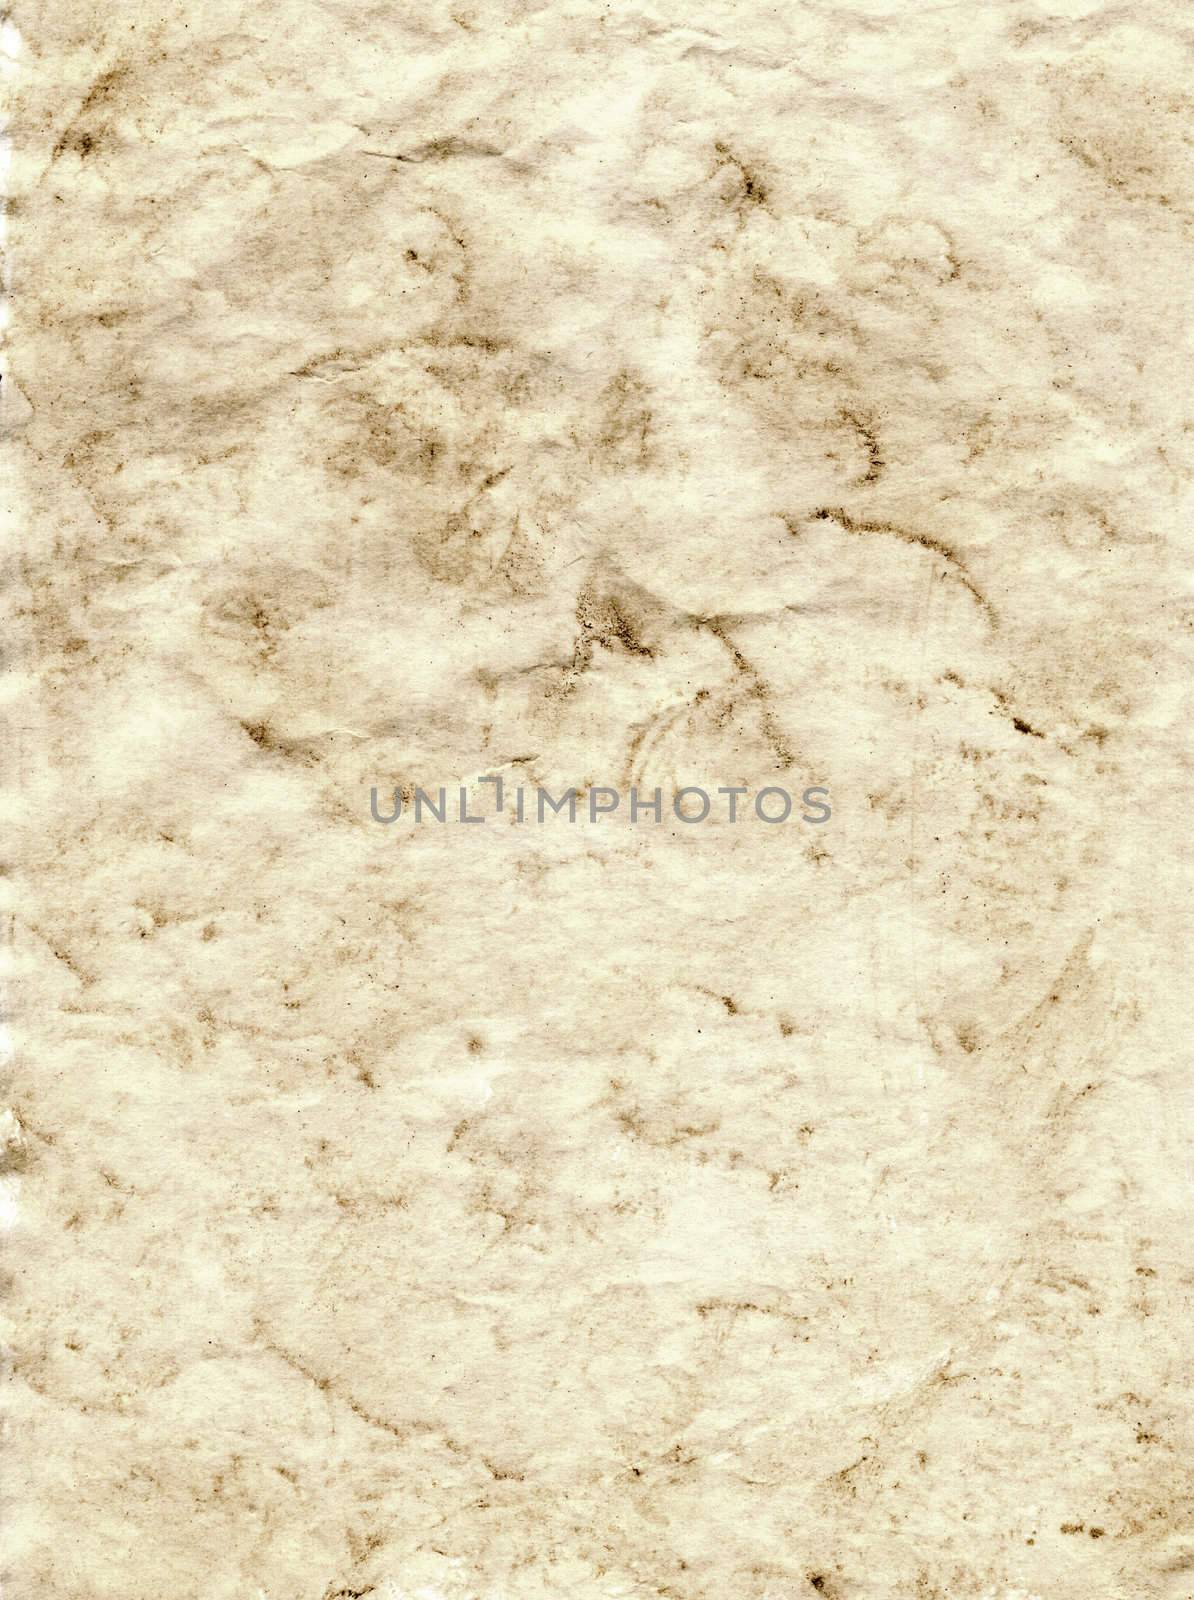 sepia grunge background of paper which is blotchy